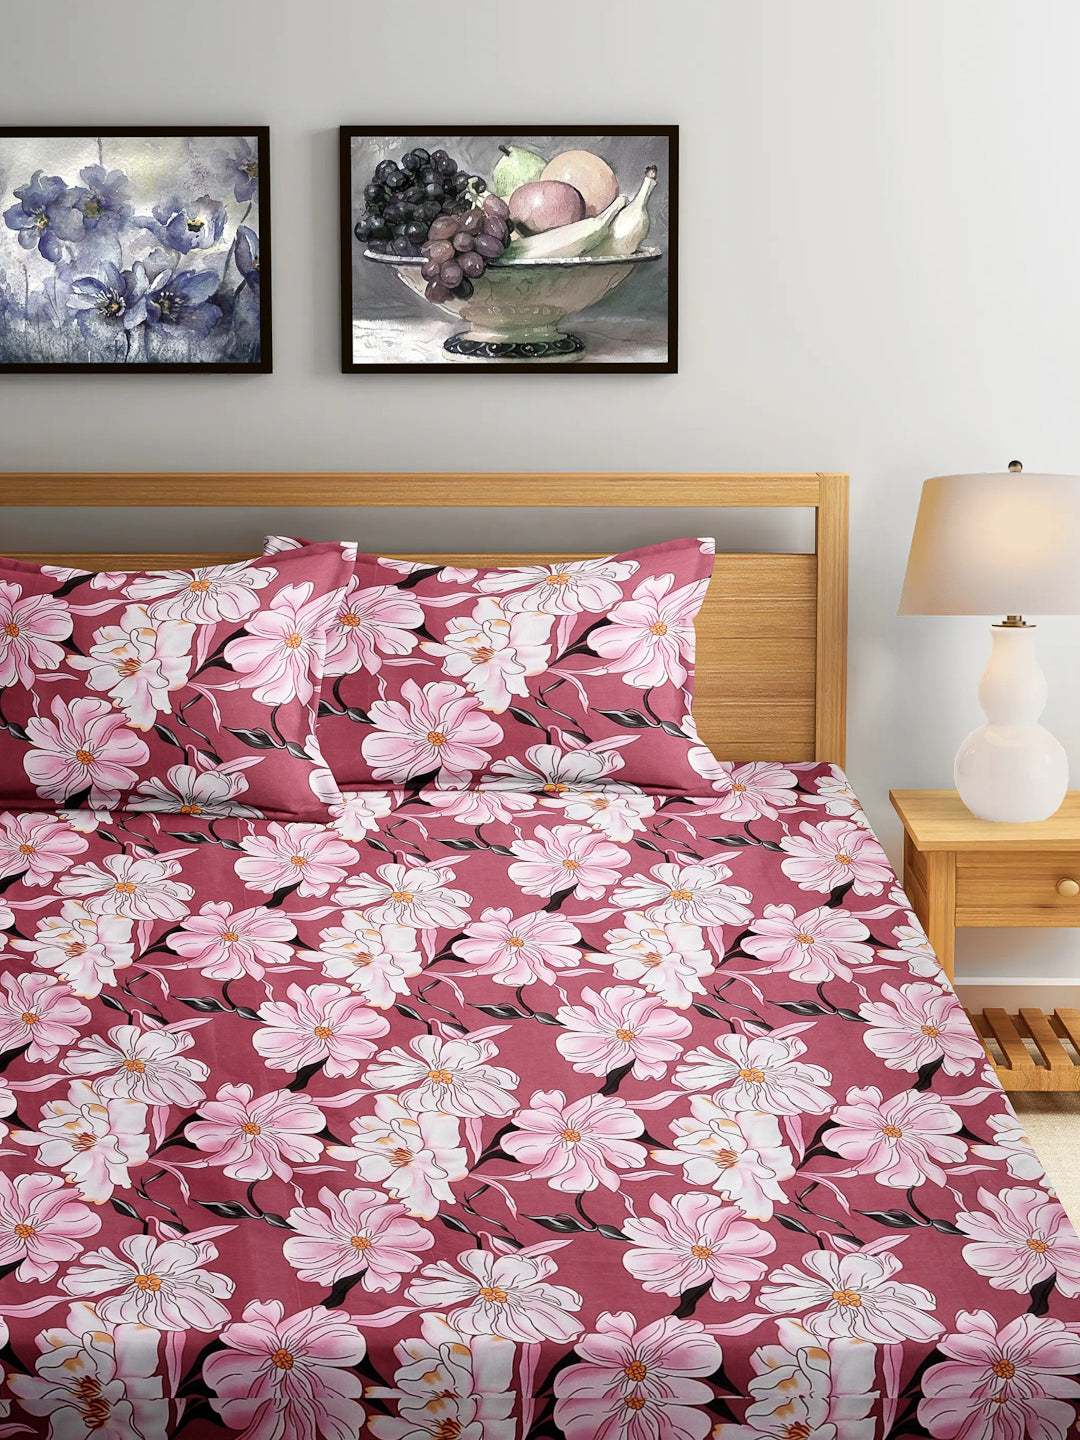 Arrabi Pink Floral TC Cotton Blend Super King Size Fitted Bedsheet with 2 Pillow Covers (270 X 260 Cm)